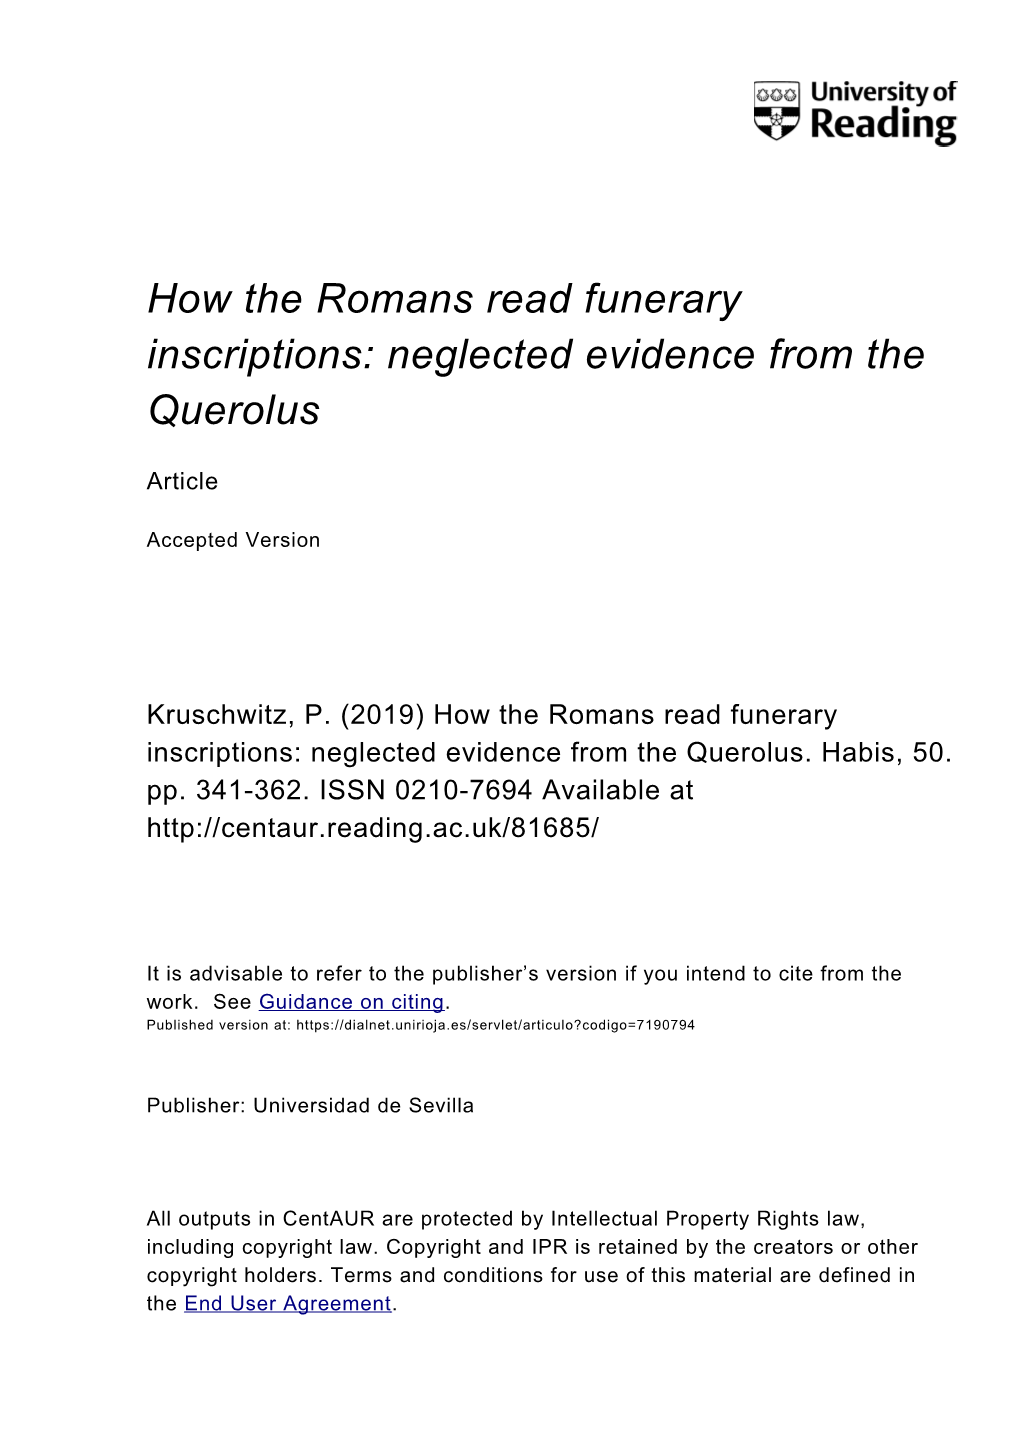 How the Romans Read Funerary Inscriptions: Neglected Evidence from the Querolus